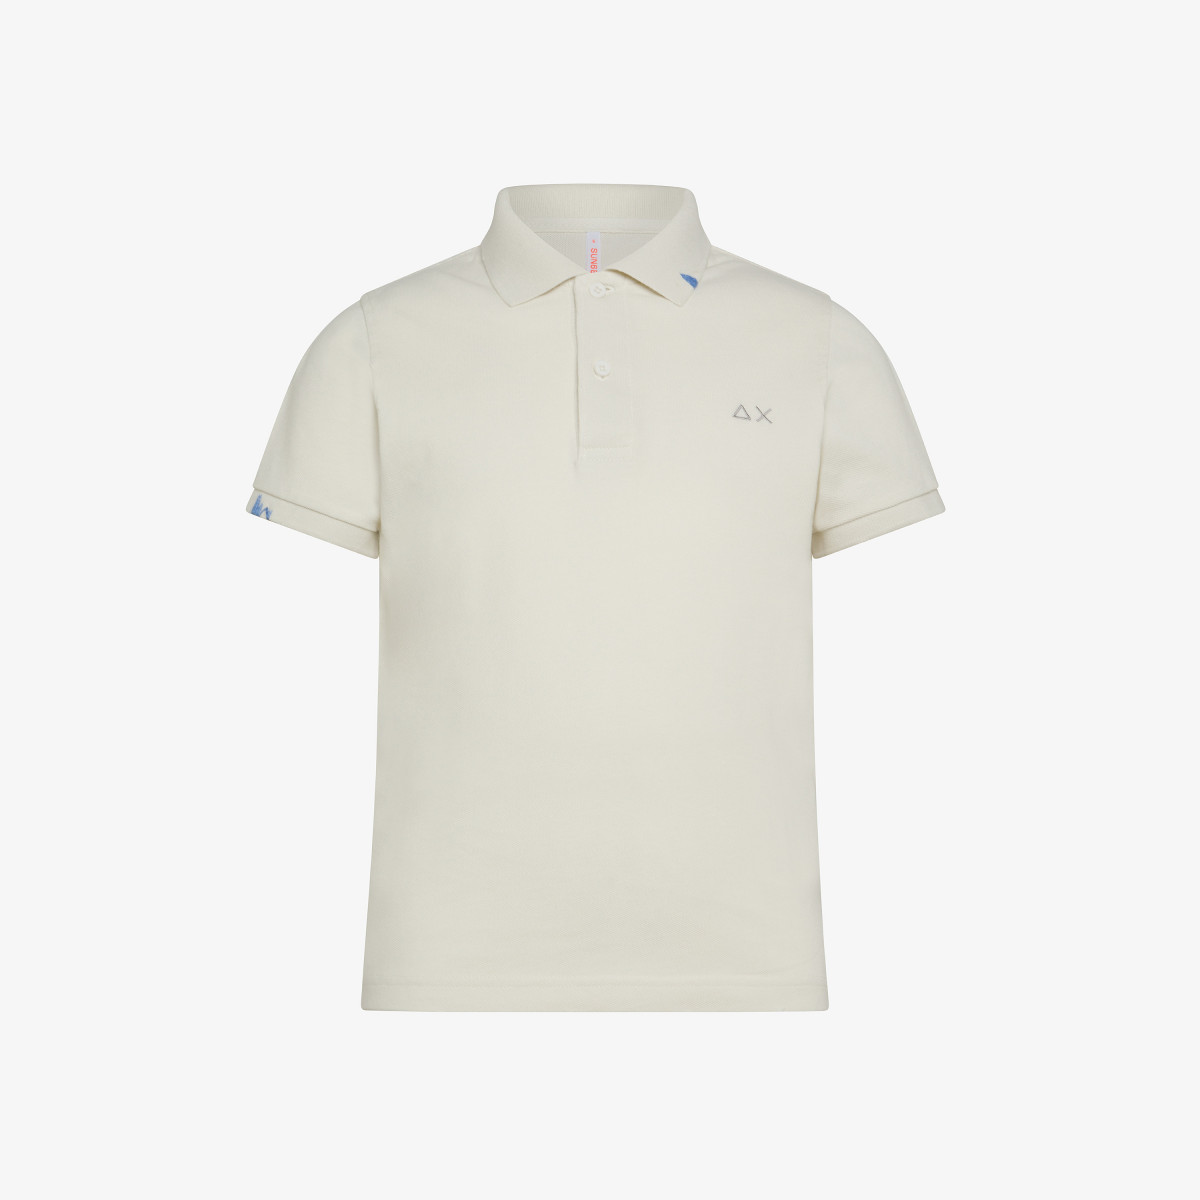 BOY'S POLO SOLID VINTAGE S/S BIANCO PANNA